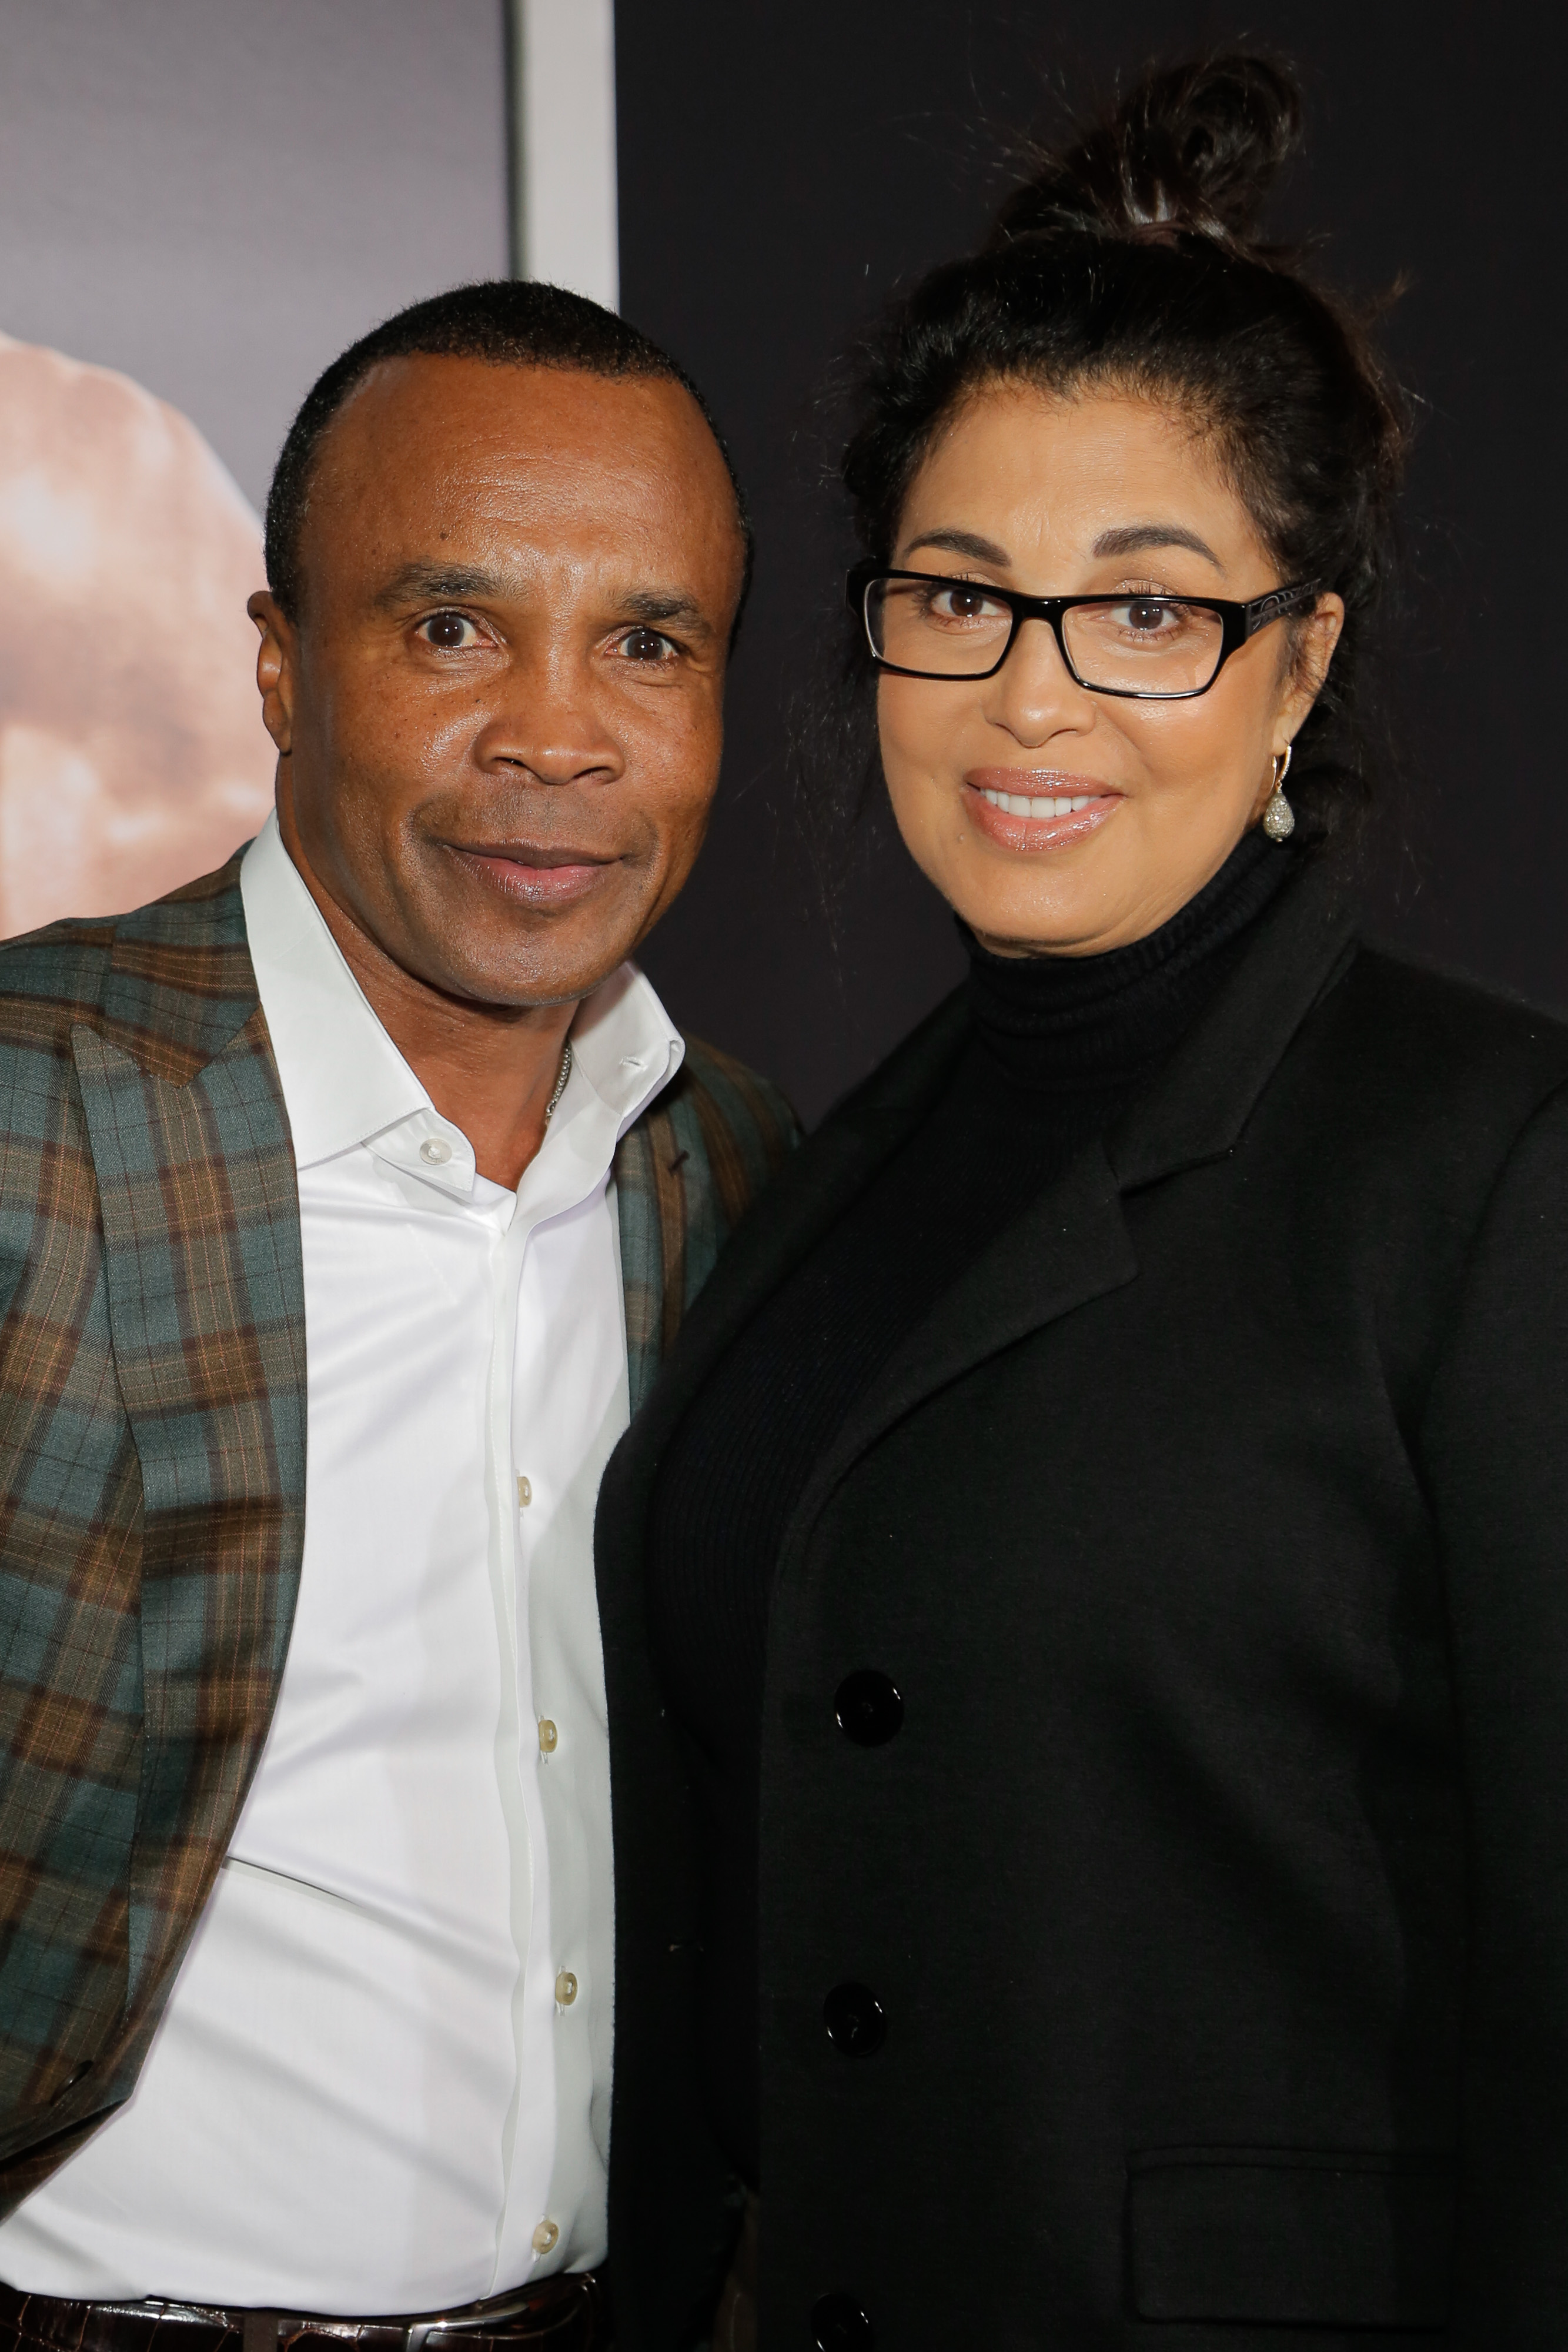 Sugar Ray Leonard and Bernadette Robi attend the "Creed" film premiere on November 19, 2015, in Los Angeles, California. | Source: Getty Images